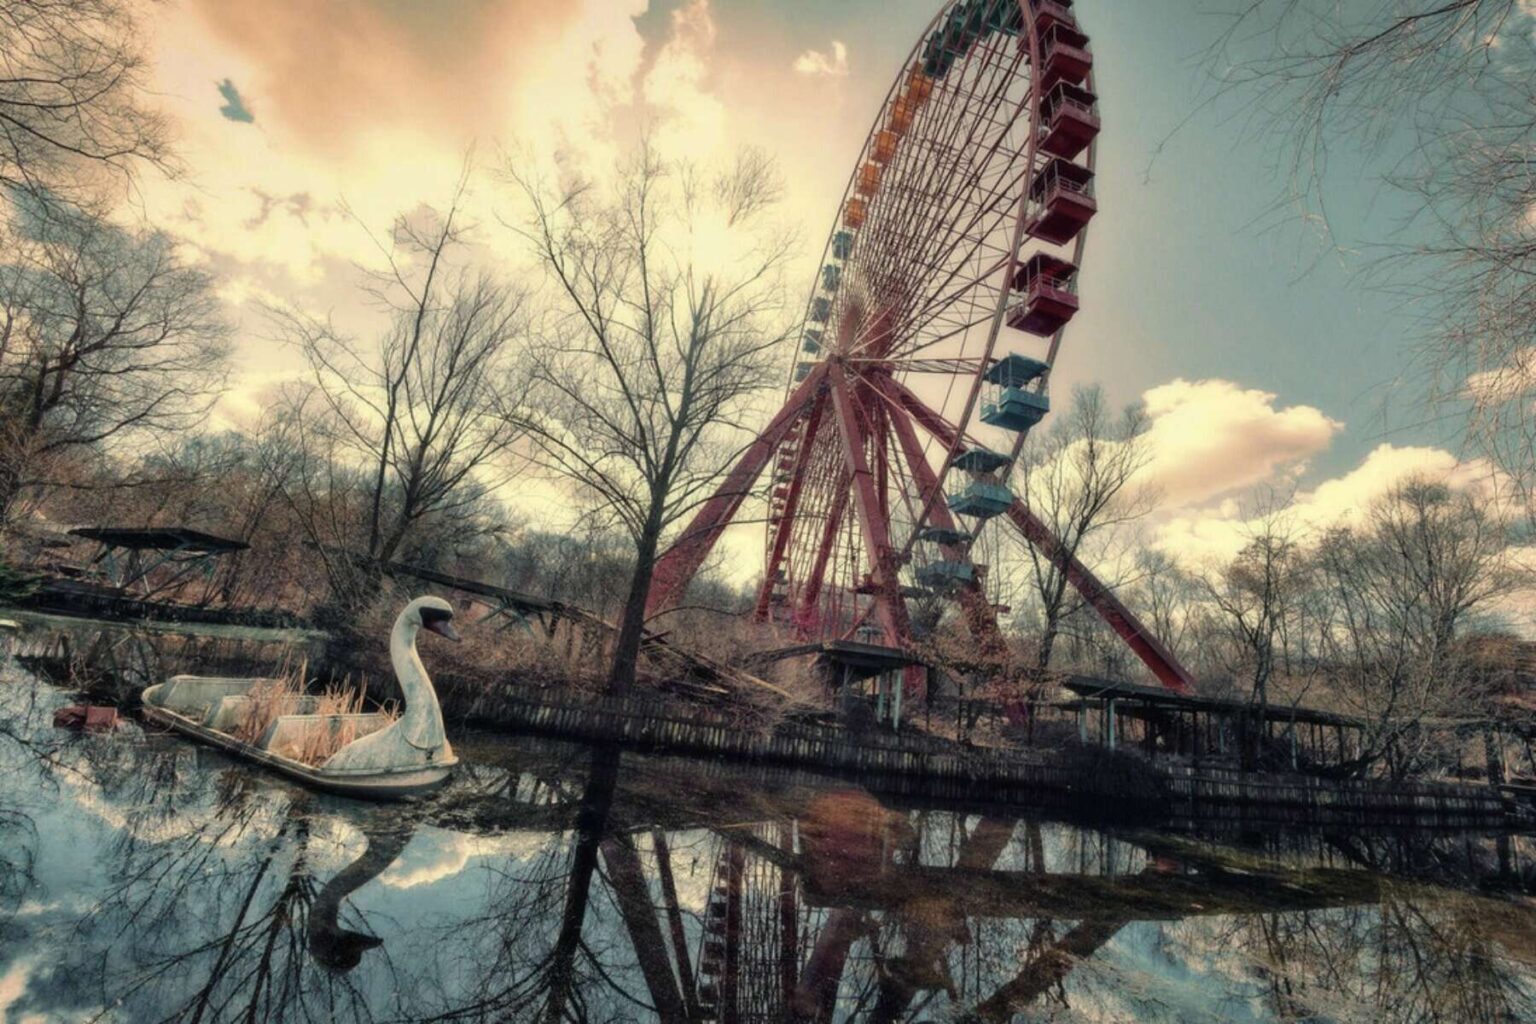 Not every theme park stays in business forever. These theme parks have been rotting away as they're left abandoned and unoccupied for years.